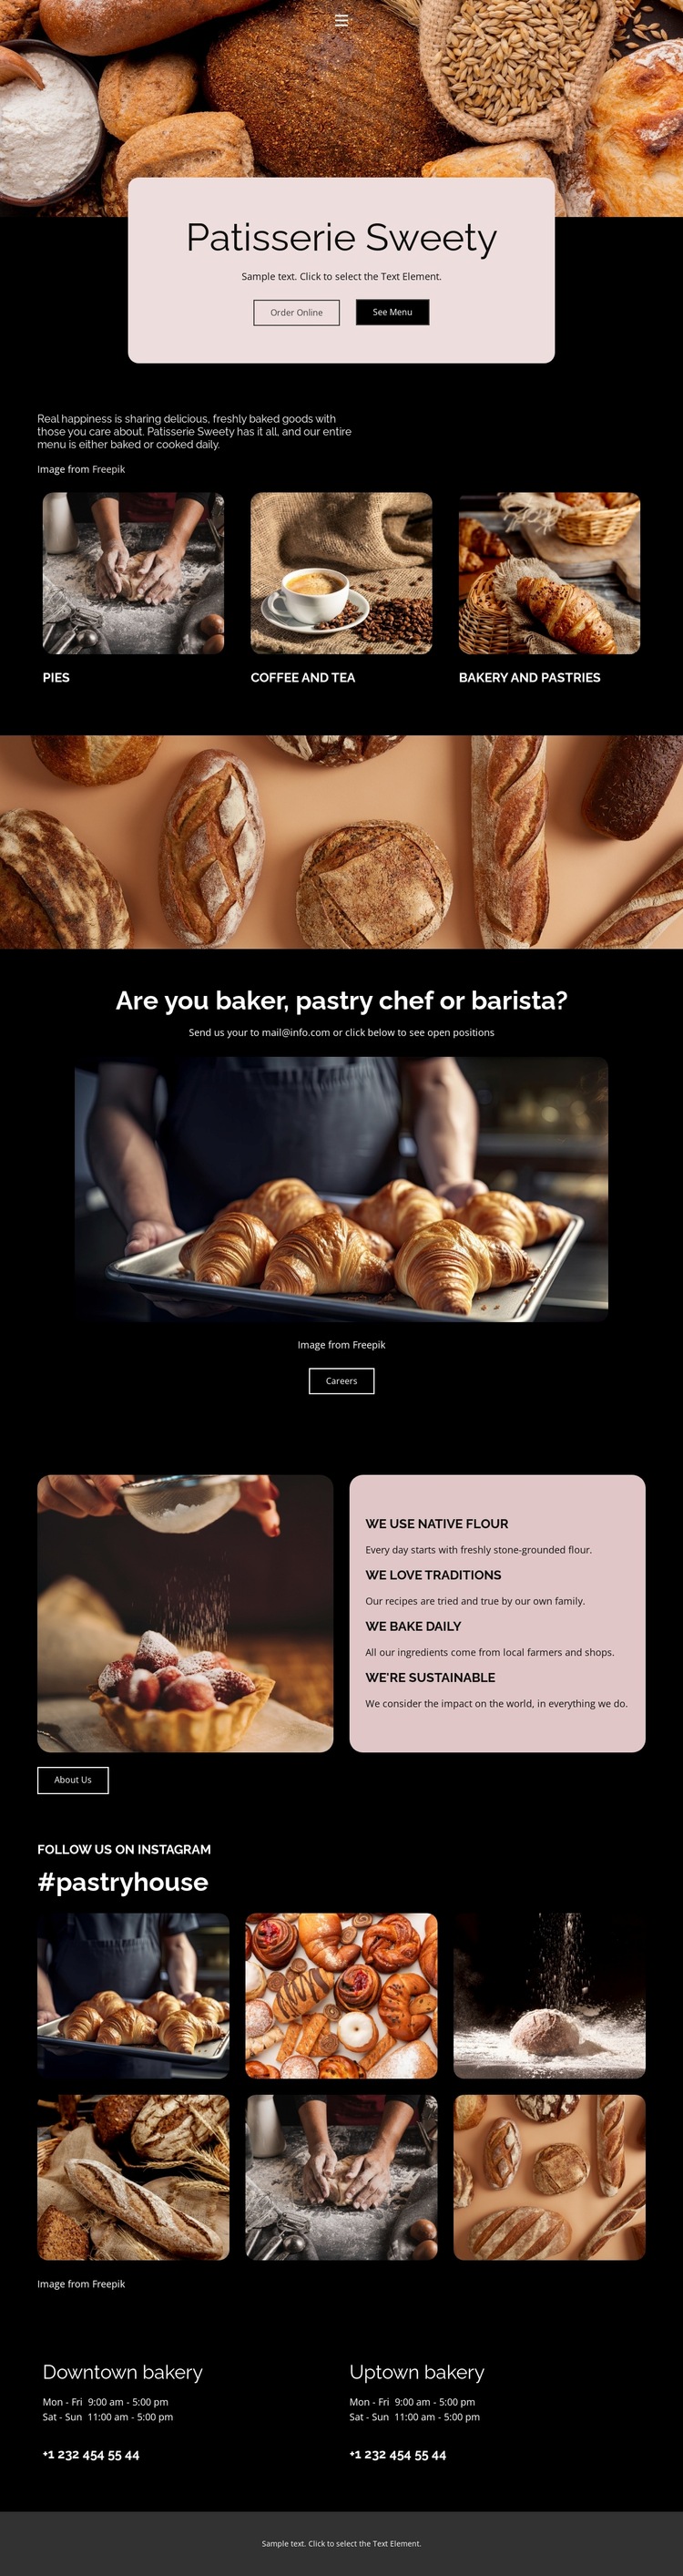 We love traditions Website Builder Templates